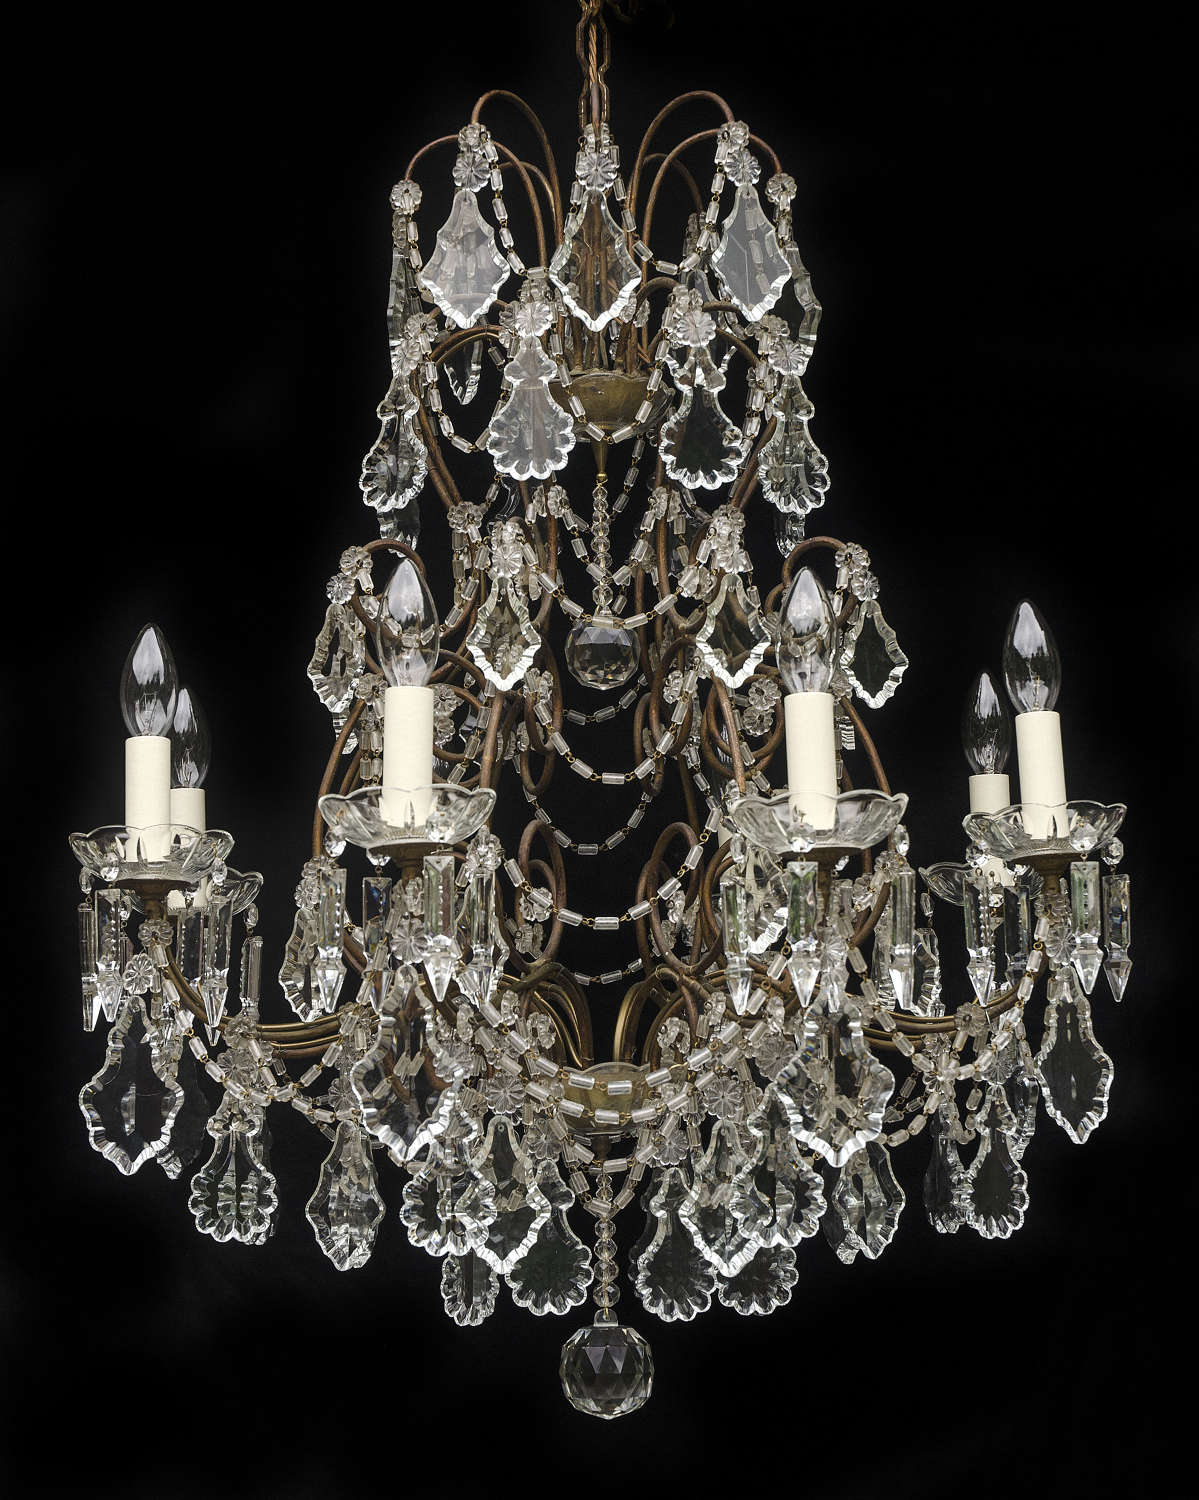 Large 8 light Italian Vintage Chandelier with crystal leaves